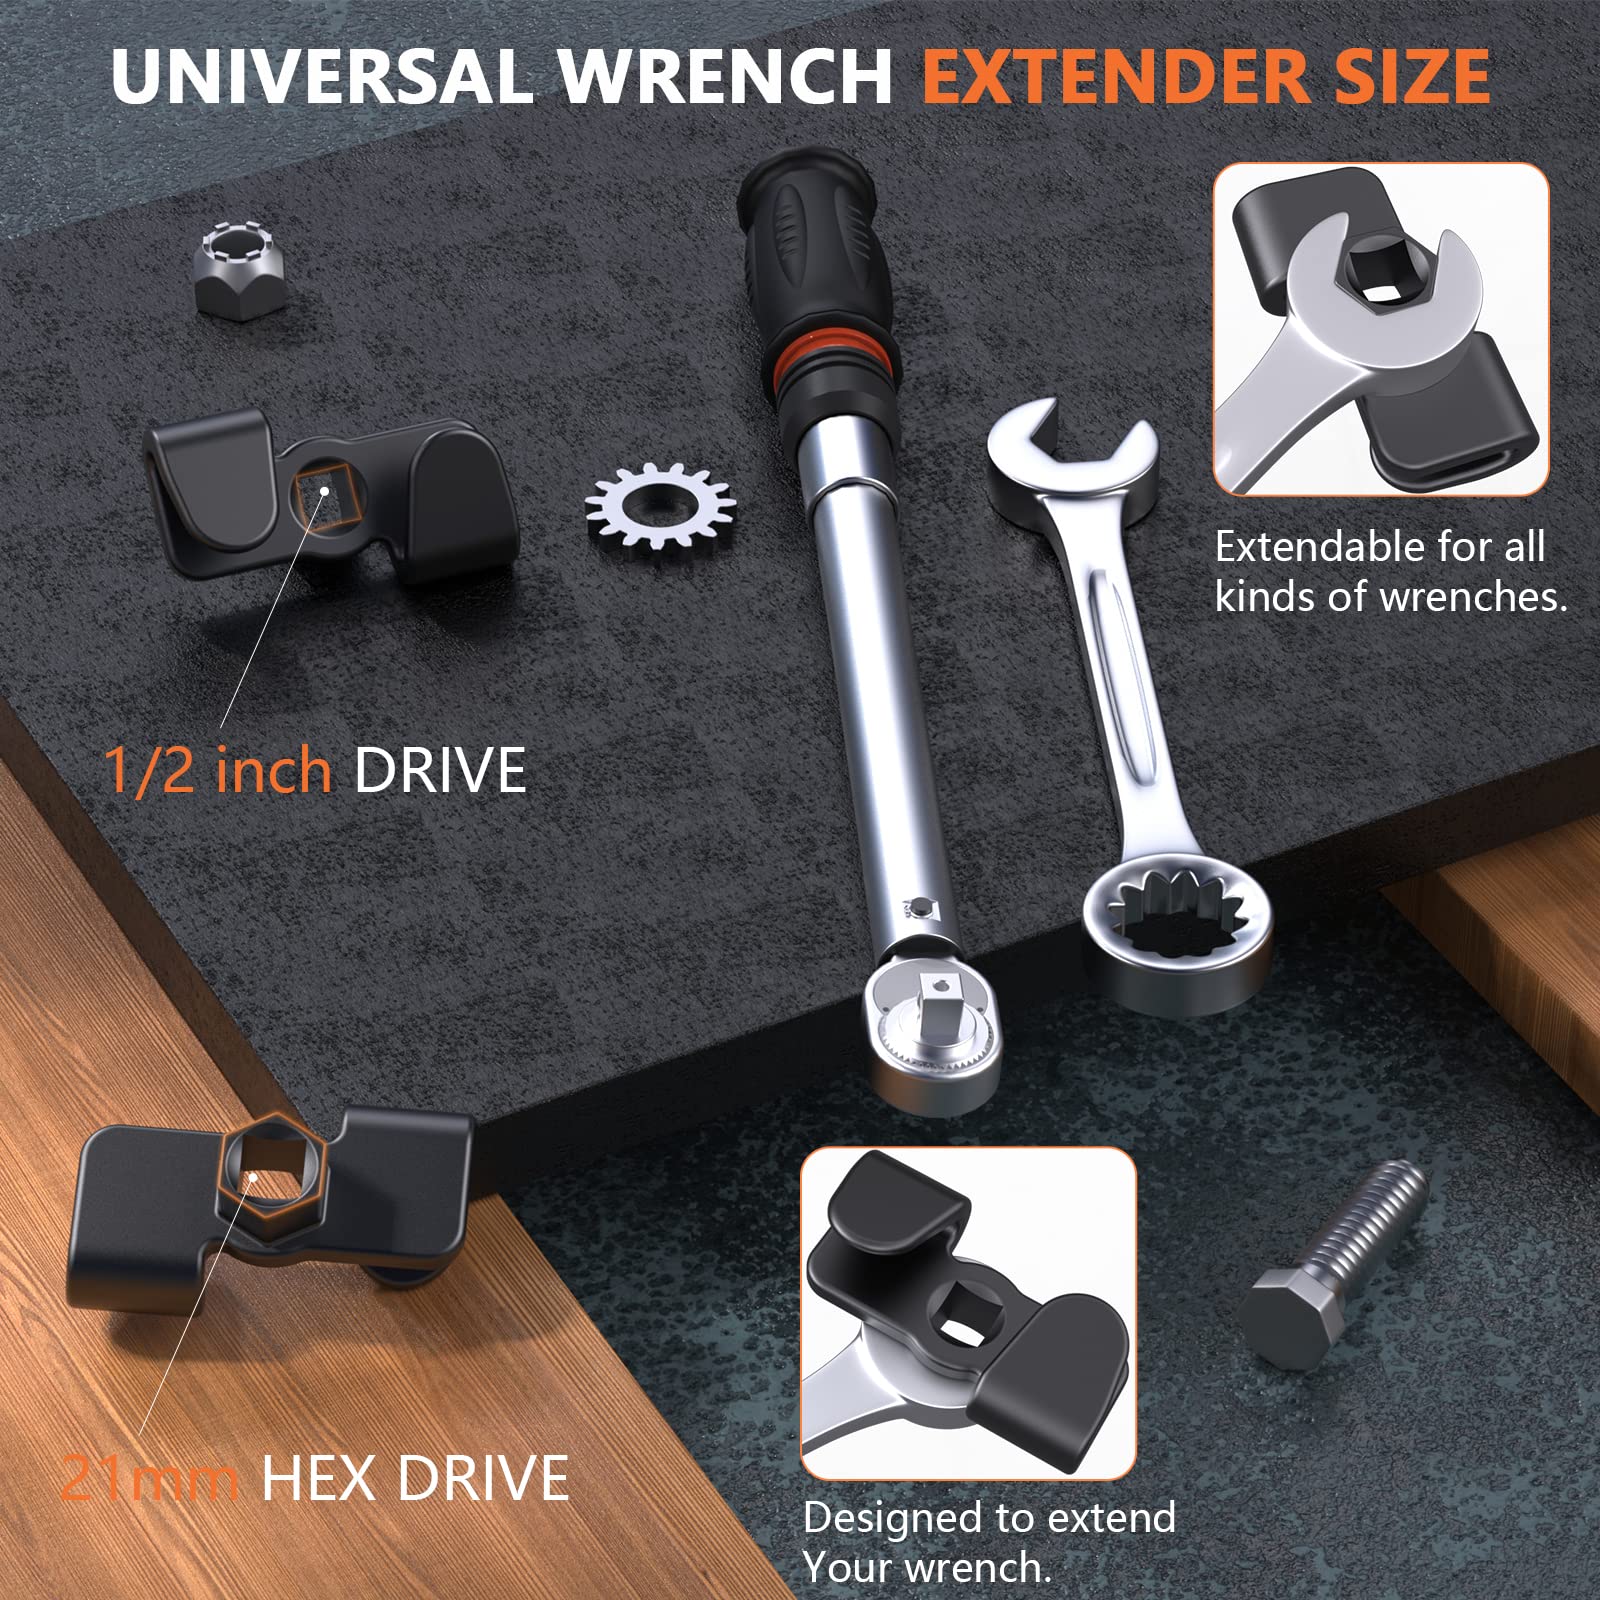 Anblak Wrench Extender for 1/2 Inch Drive Breaker Bars/21 mm Hex Drive, Universal Wrench Extension Tool Adaptor for Cheater Bar, Extend Wrenches Tool to Leverage over Stubborn Nuts，Bolts